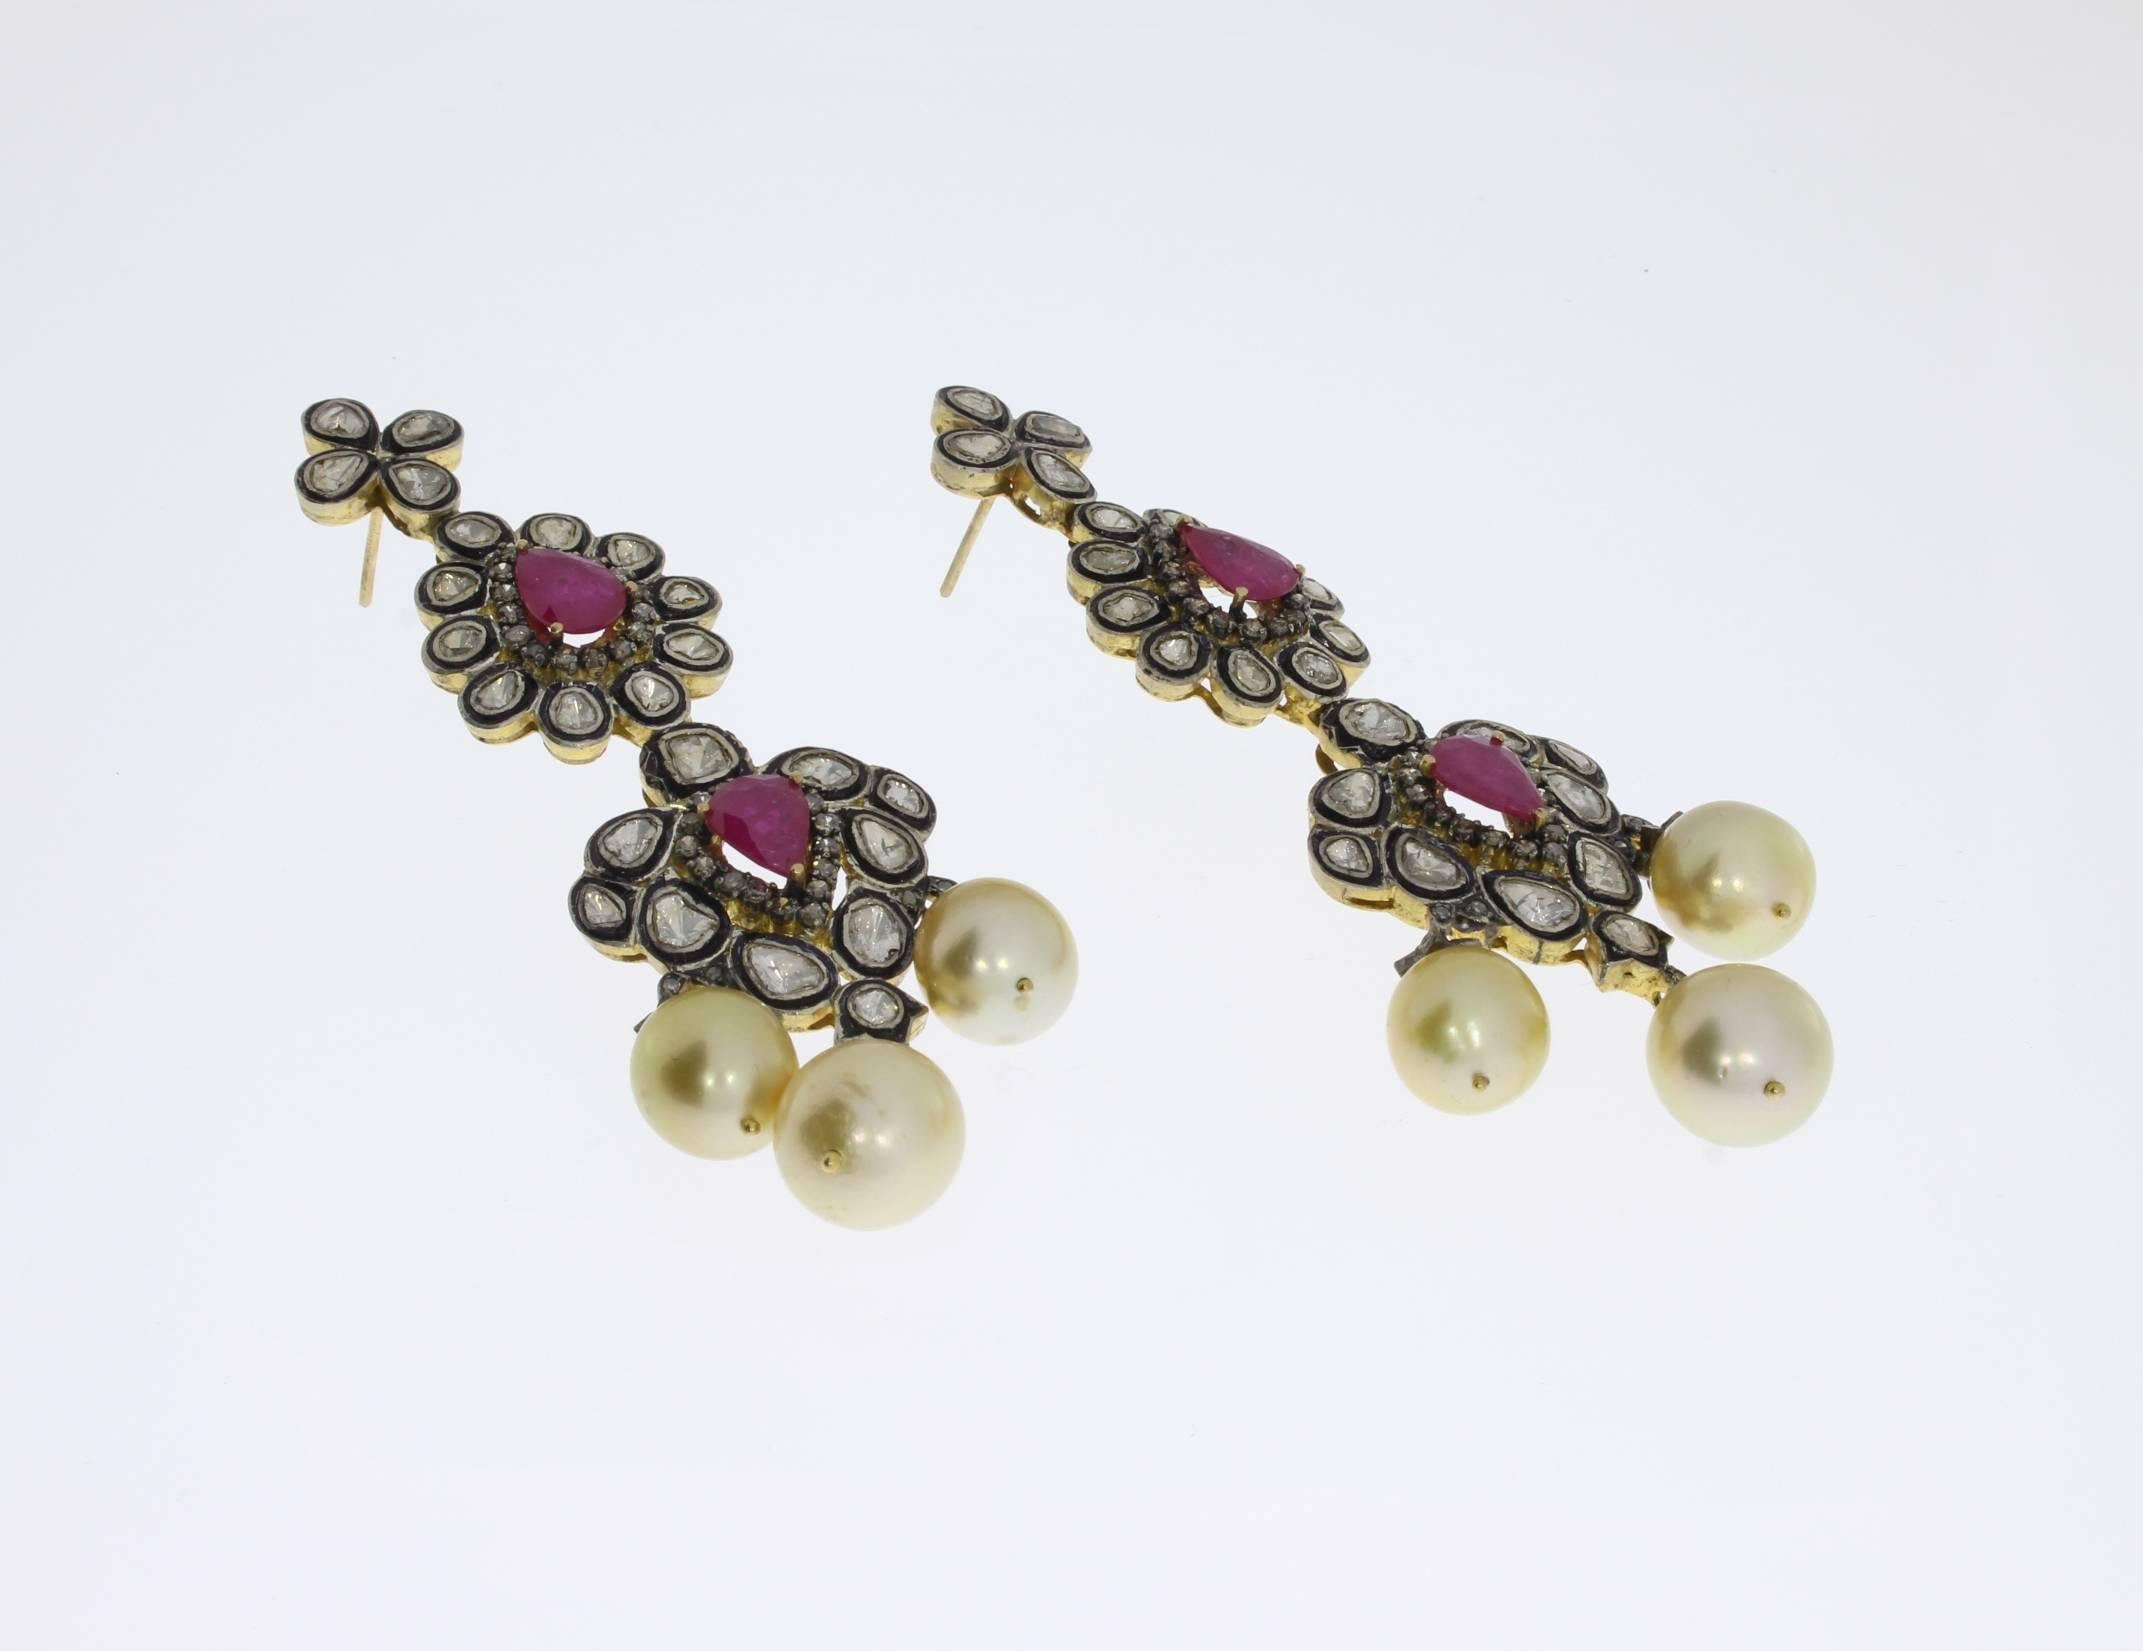 Oriental earrings, design about 1900 with 48 diamonds of circa 9,5 ct. total, 4 tear-drops rubies and 6 South Sea pearls with 10-11 mm in diameter. Mounted in 14 K gold and sterling silver. Total weight: 42,41 g. Length: 3.35 in ( 8,5 cm )